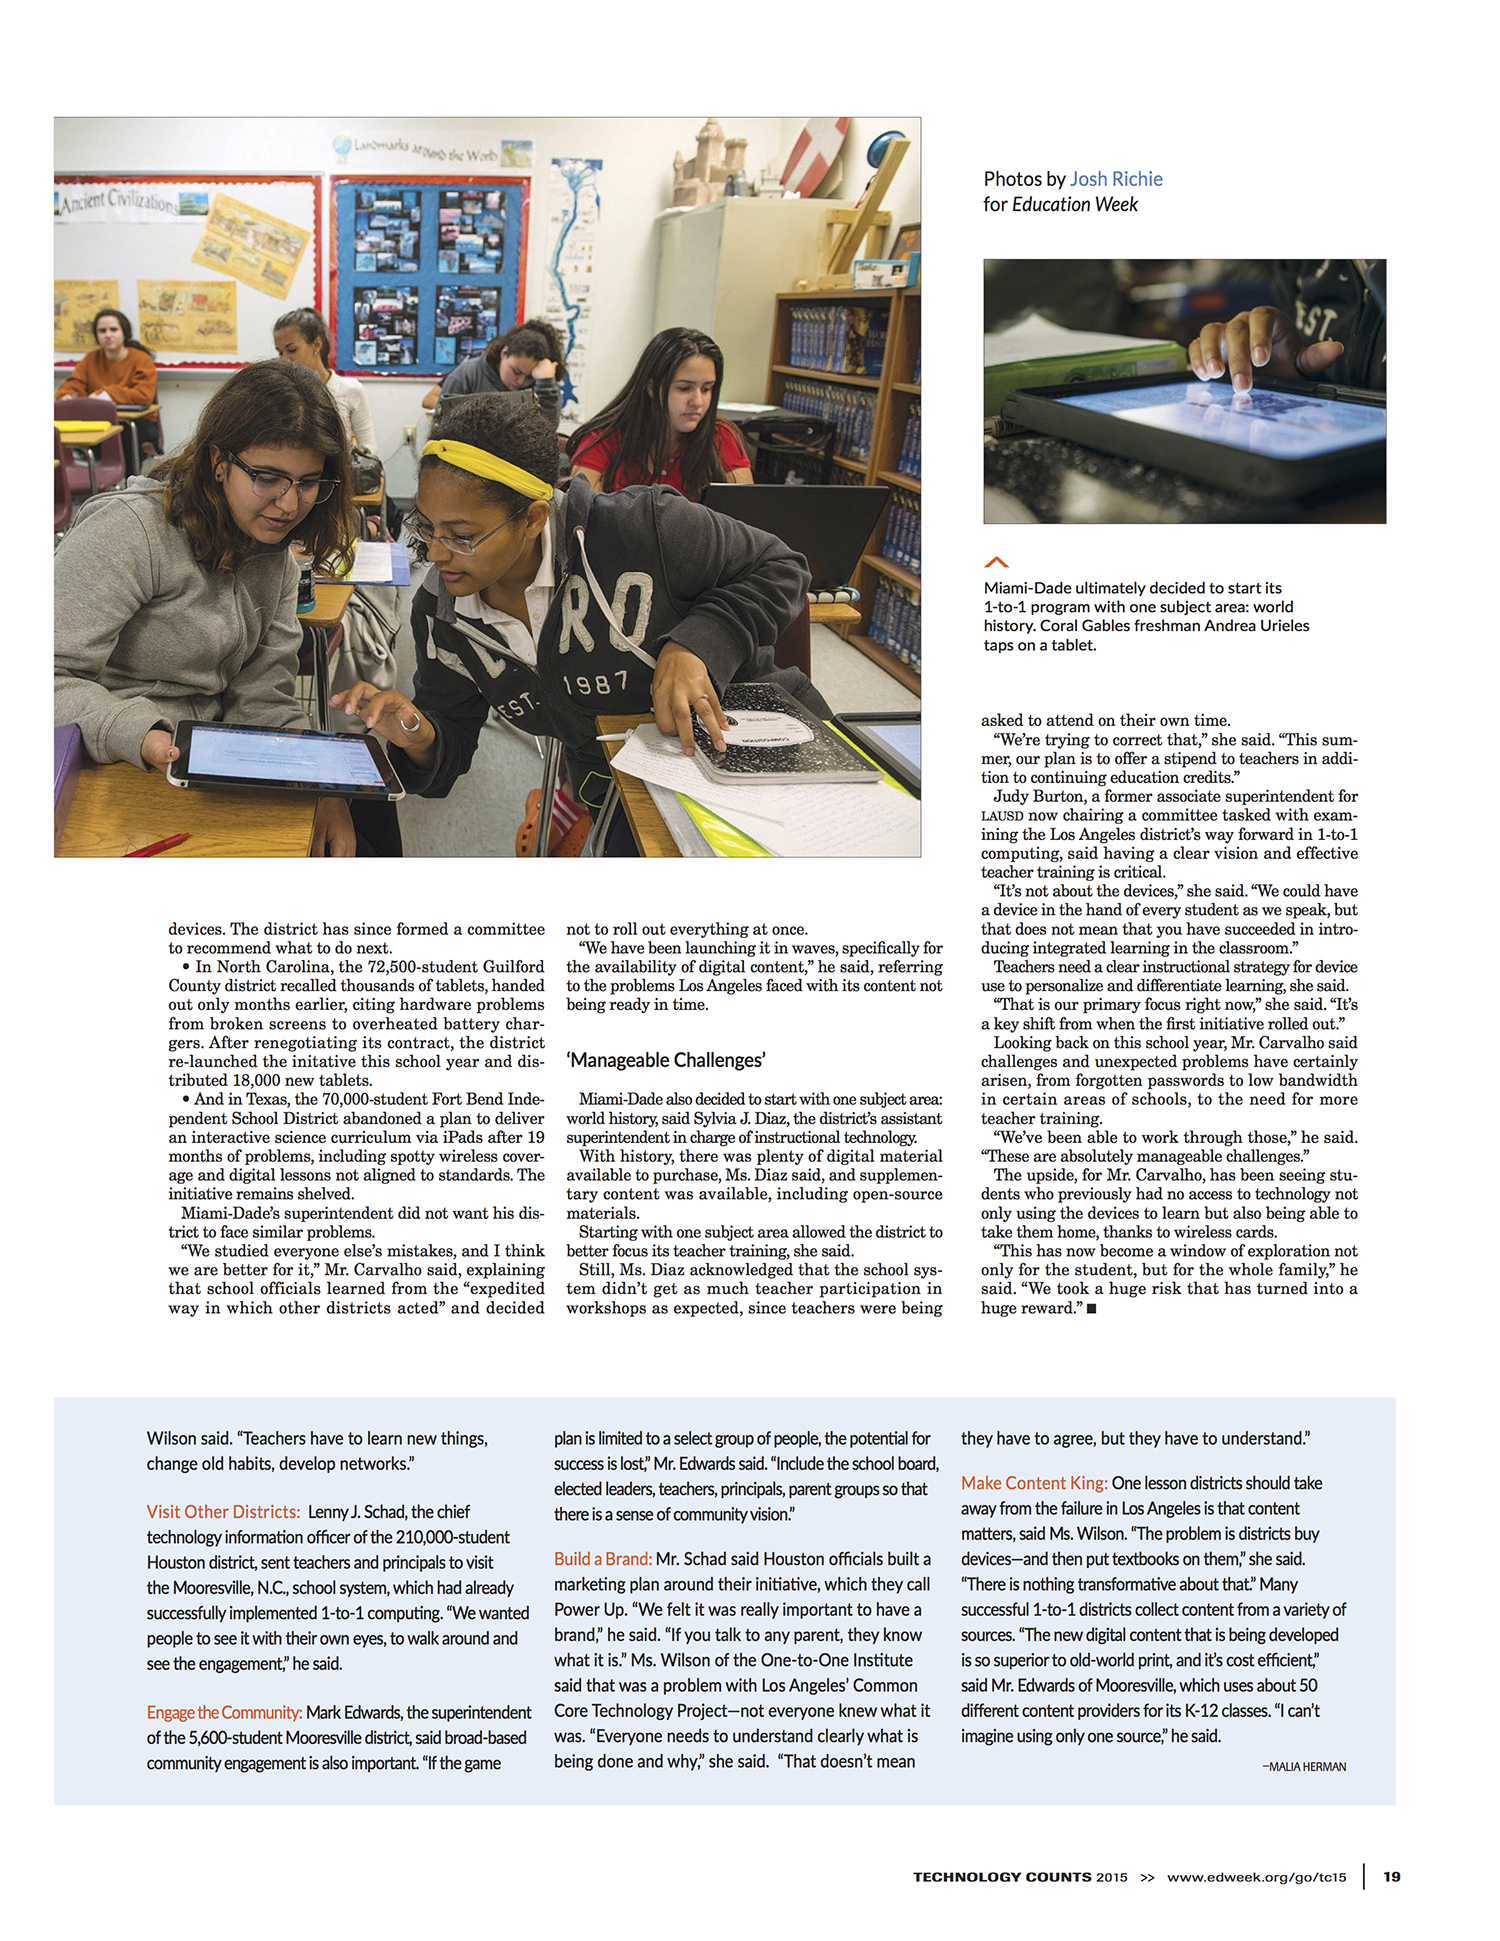 Technology Counts, Education Week Special Edition, June 11, 2015